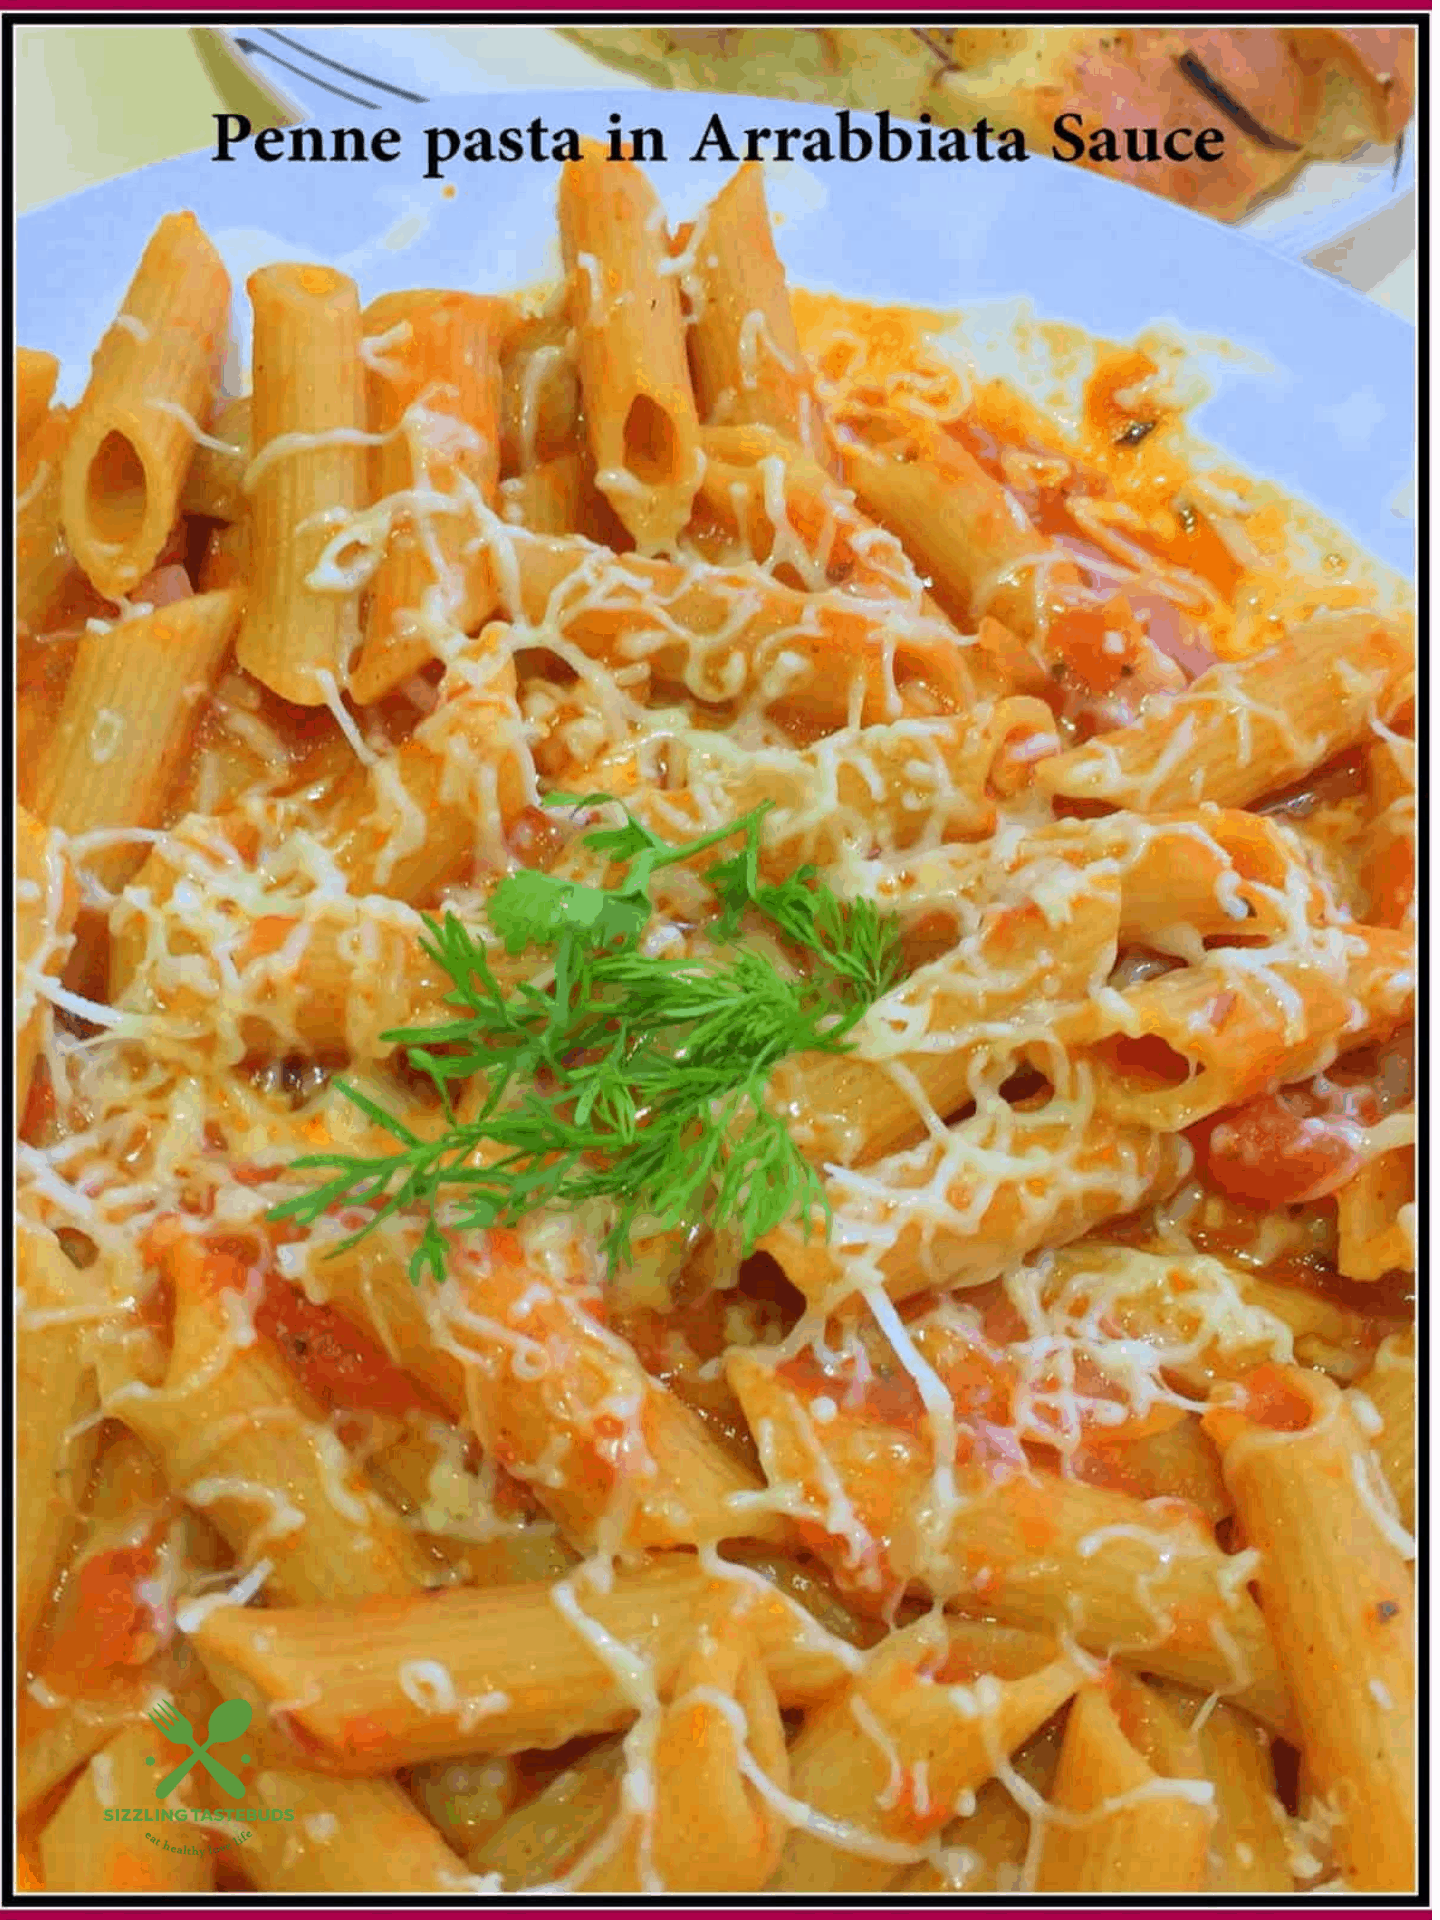 WholeWheat Penne Pasta in a creamy, cheesy homemade Arrabbiata sauce. Perfect for weeknight dinners or kids parties.